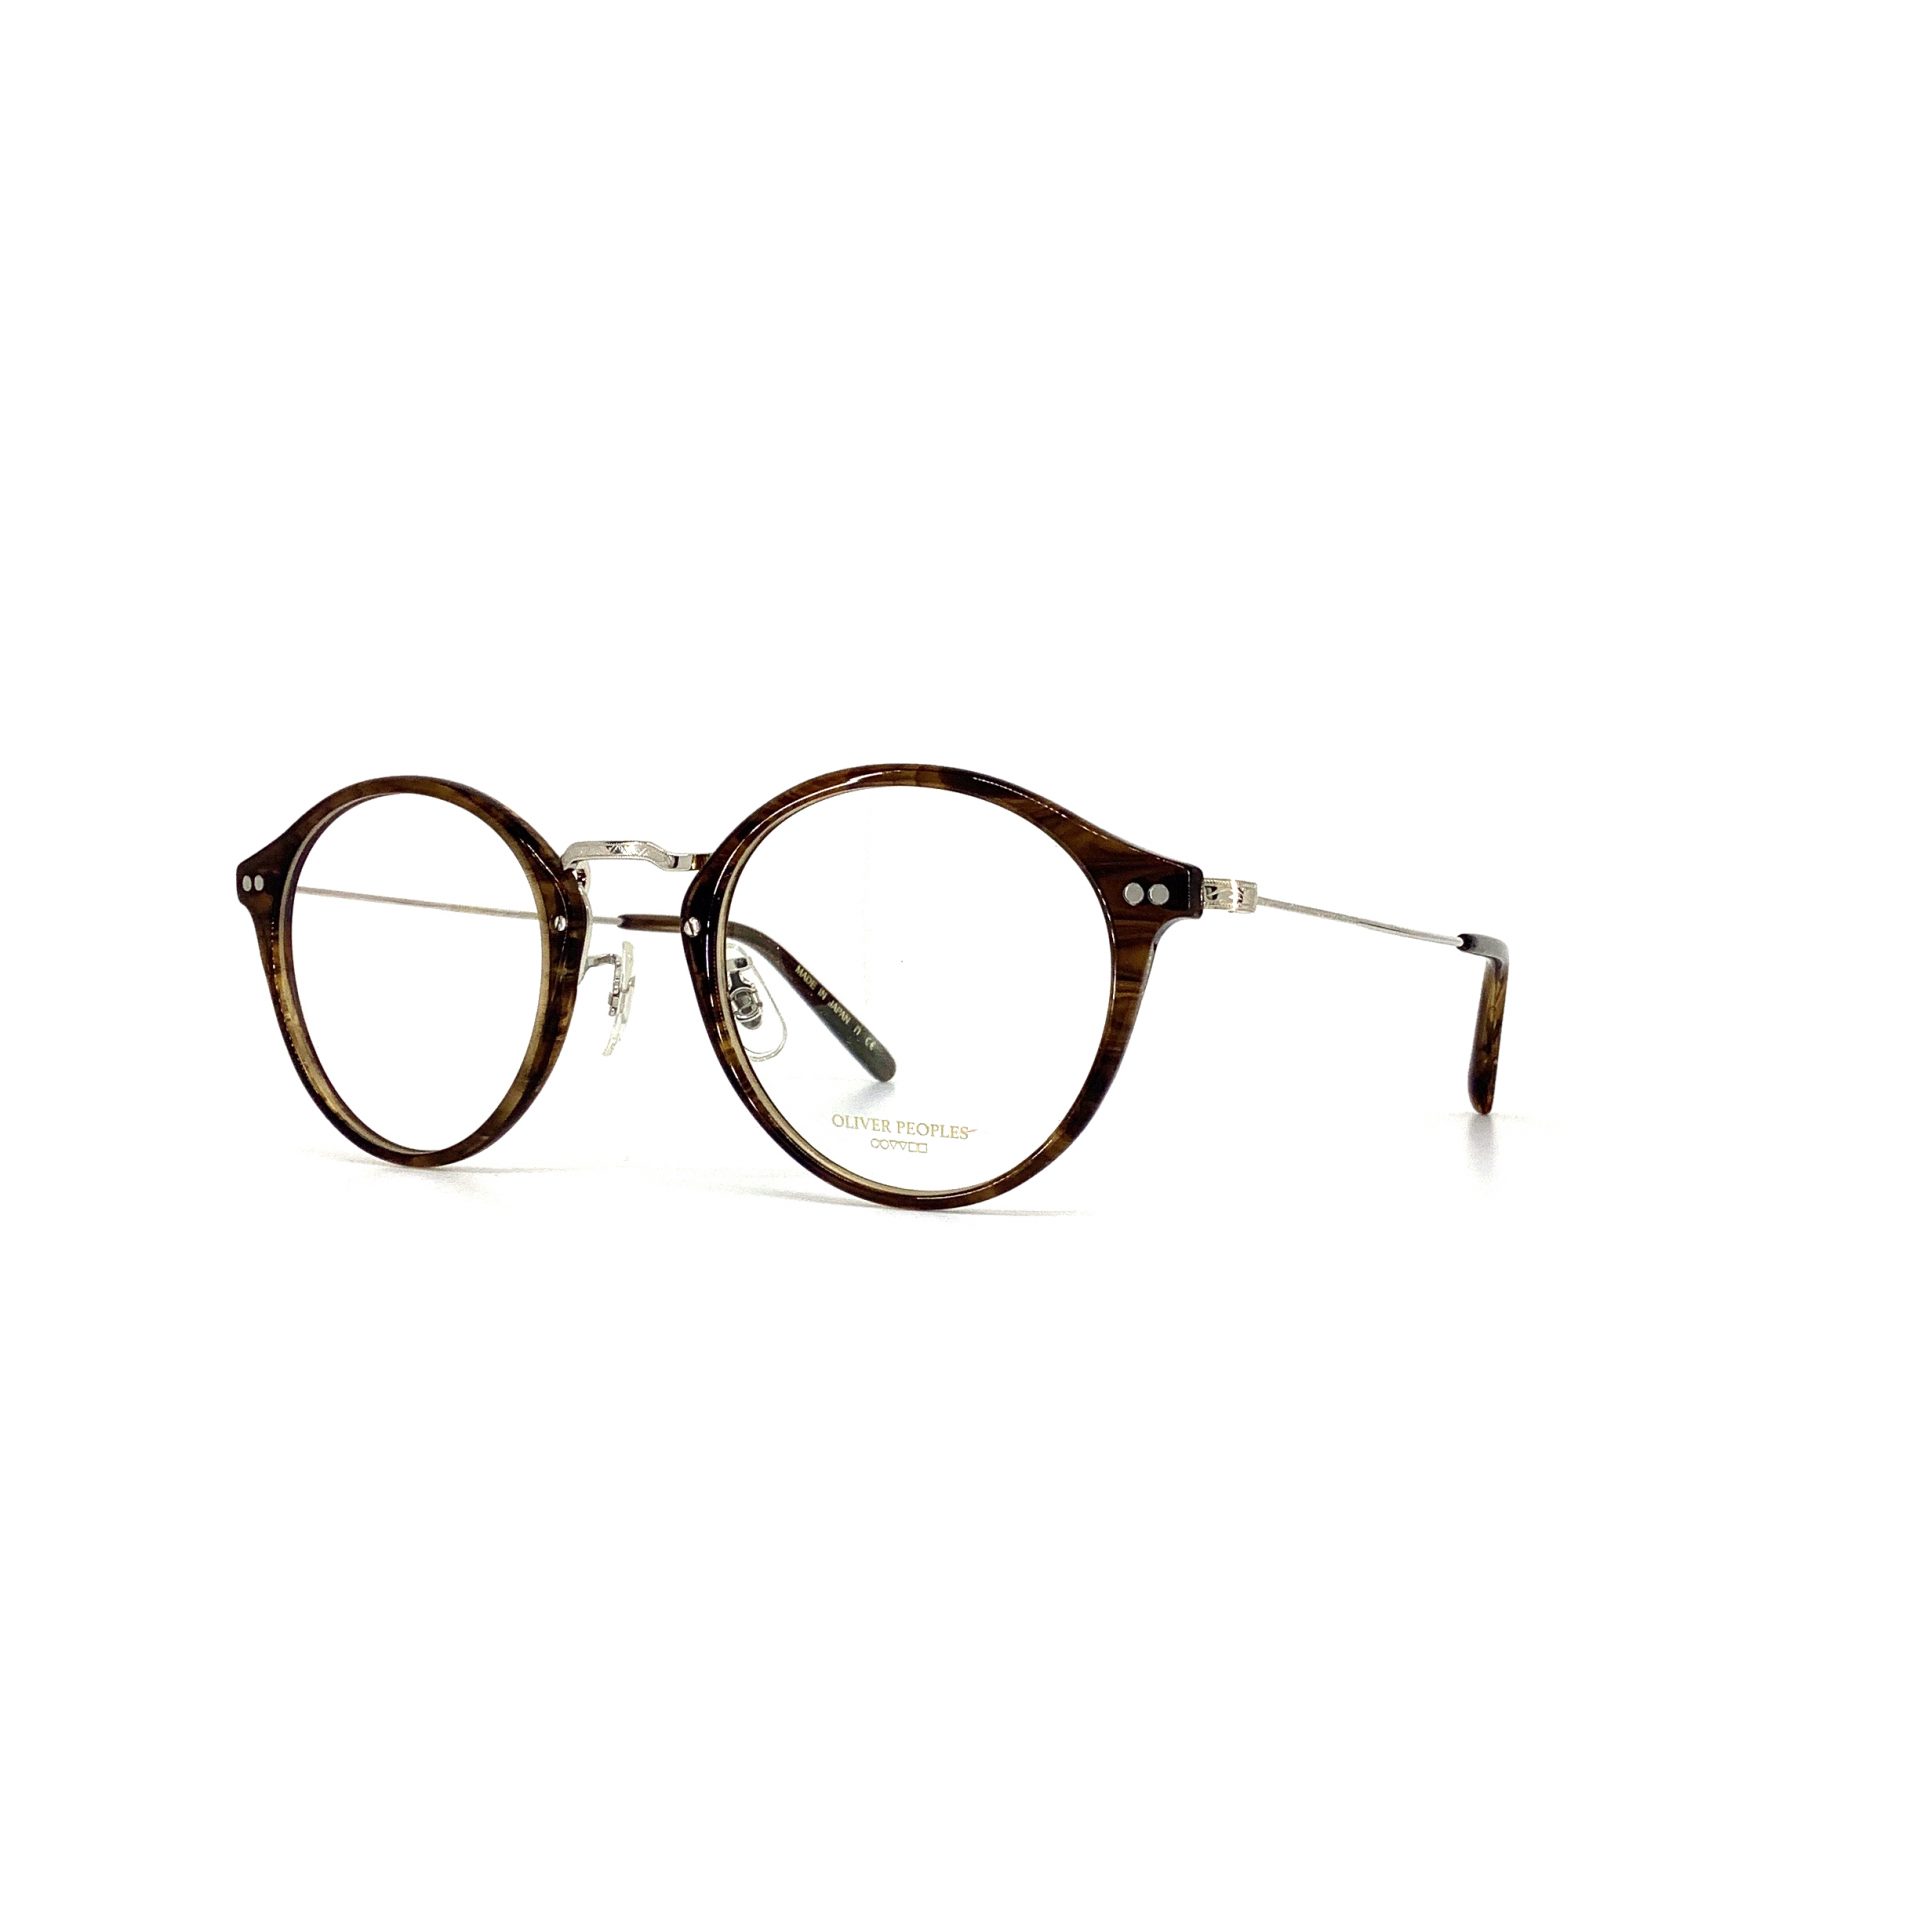 OLIVER PEOPLES/DONAIRE/5448T/1689/46 - THEye Optical